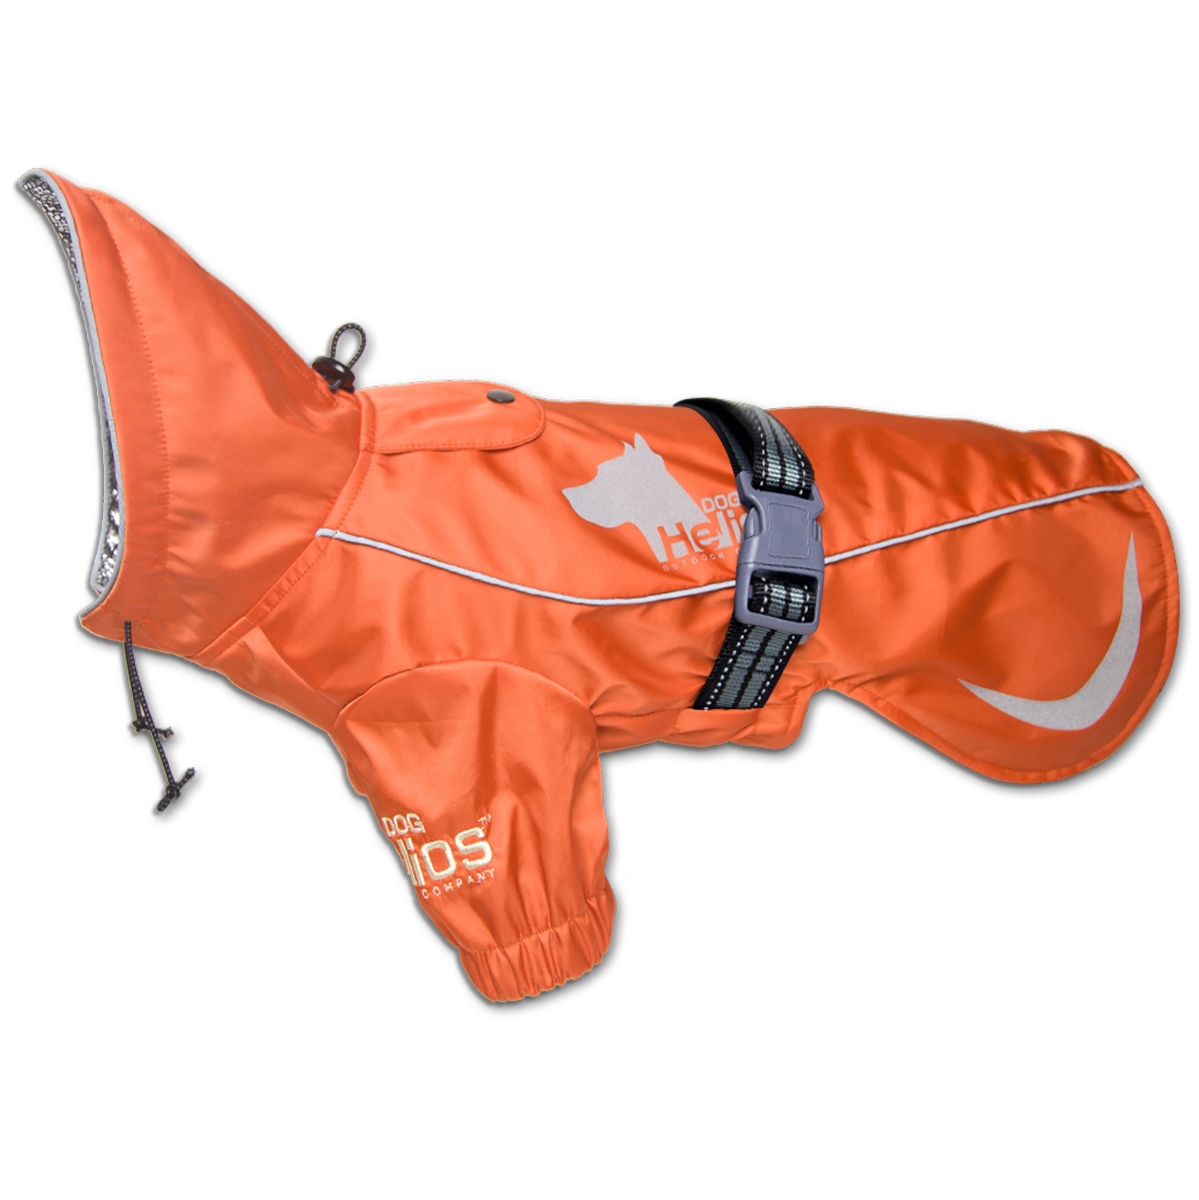 Picture of Dog Helios JKHL16ORSM Ice-Breaker Extendable Hooded Dog Coat with Heat Reflective Tech - Orange - Small